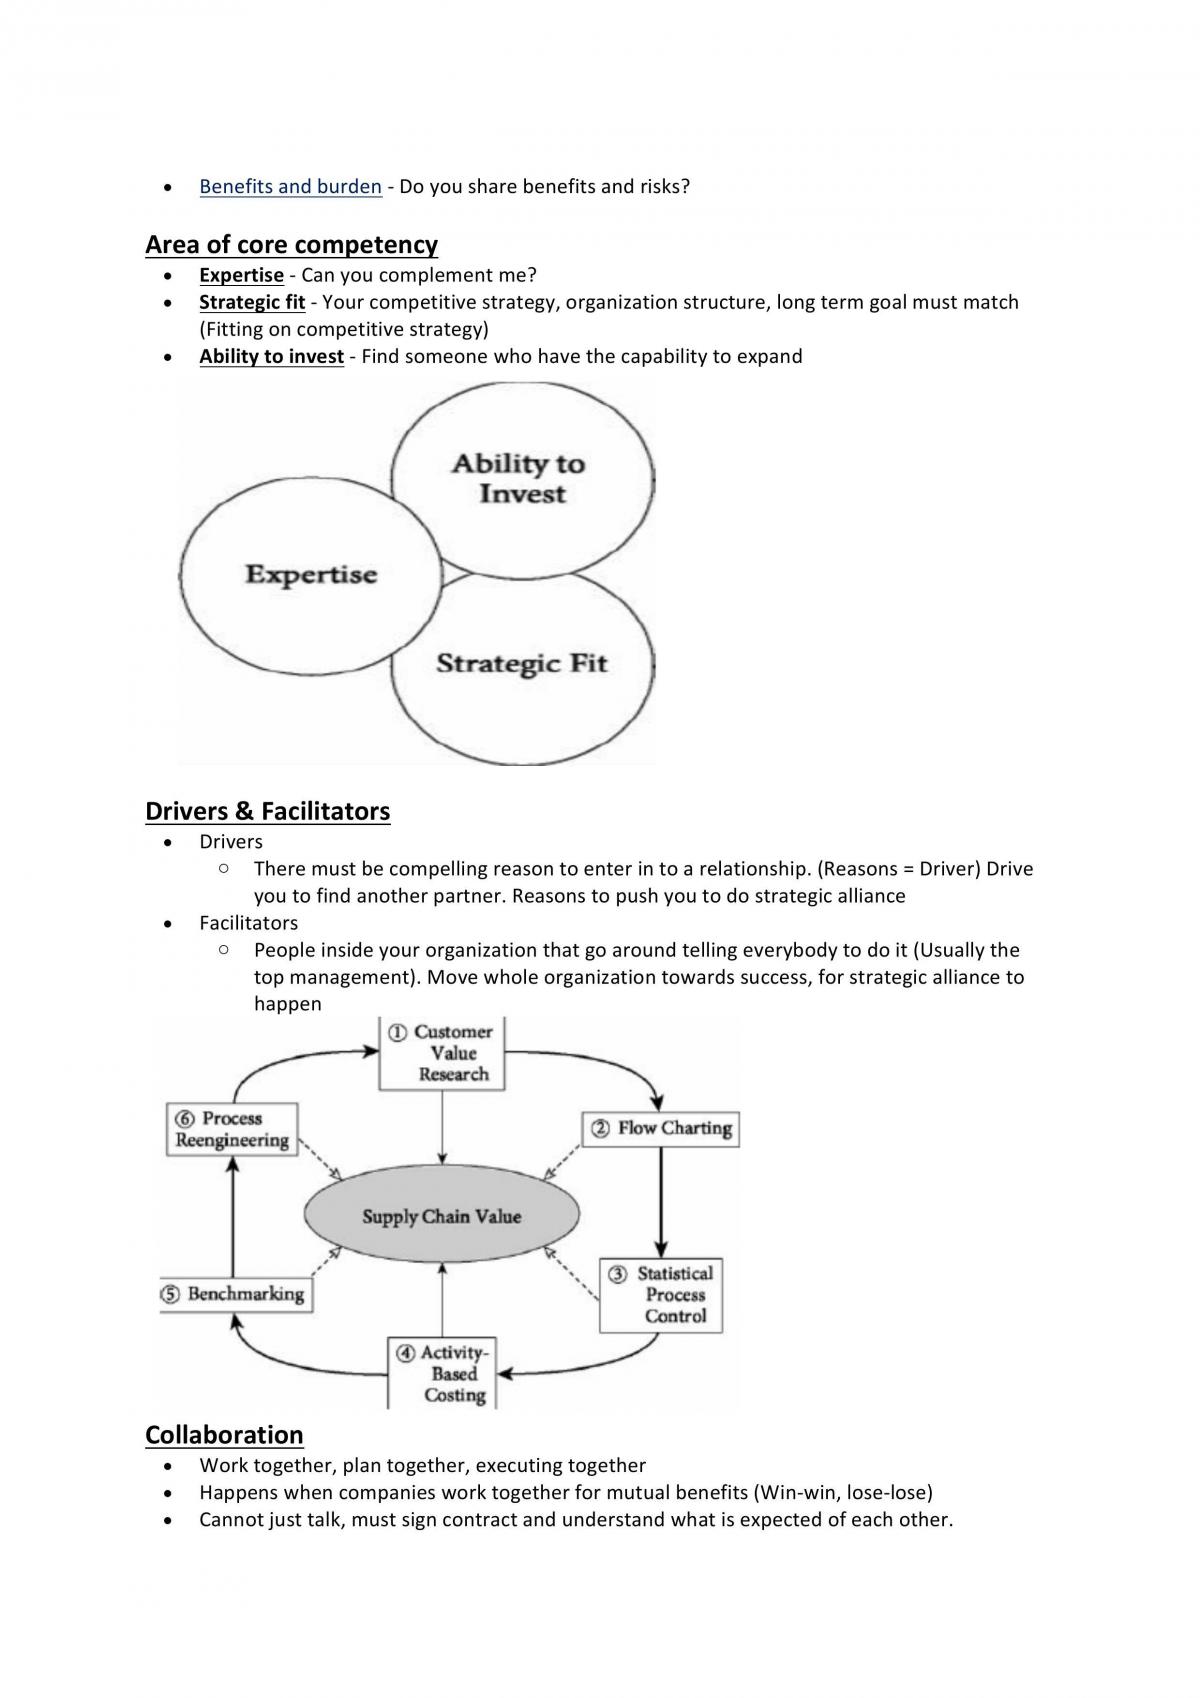 Introduction to Logistics and Supply Chain Management Full Notes - Page 51